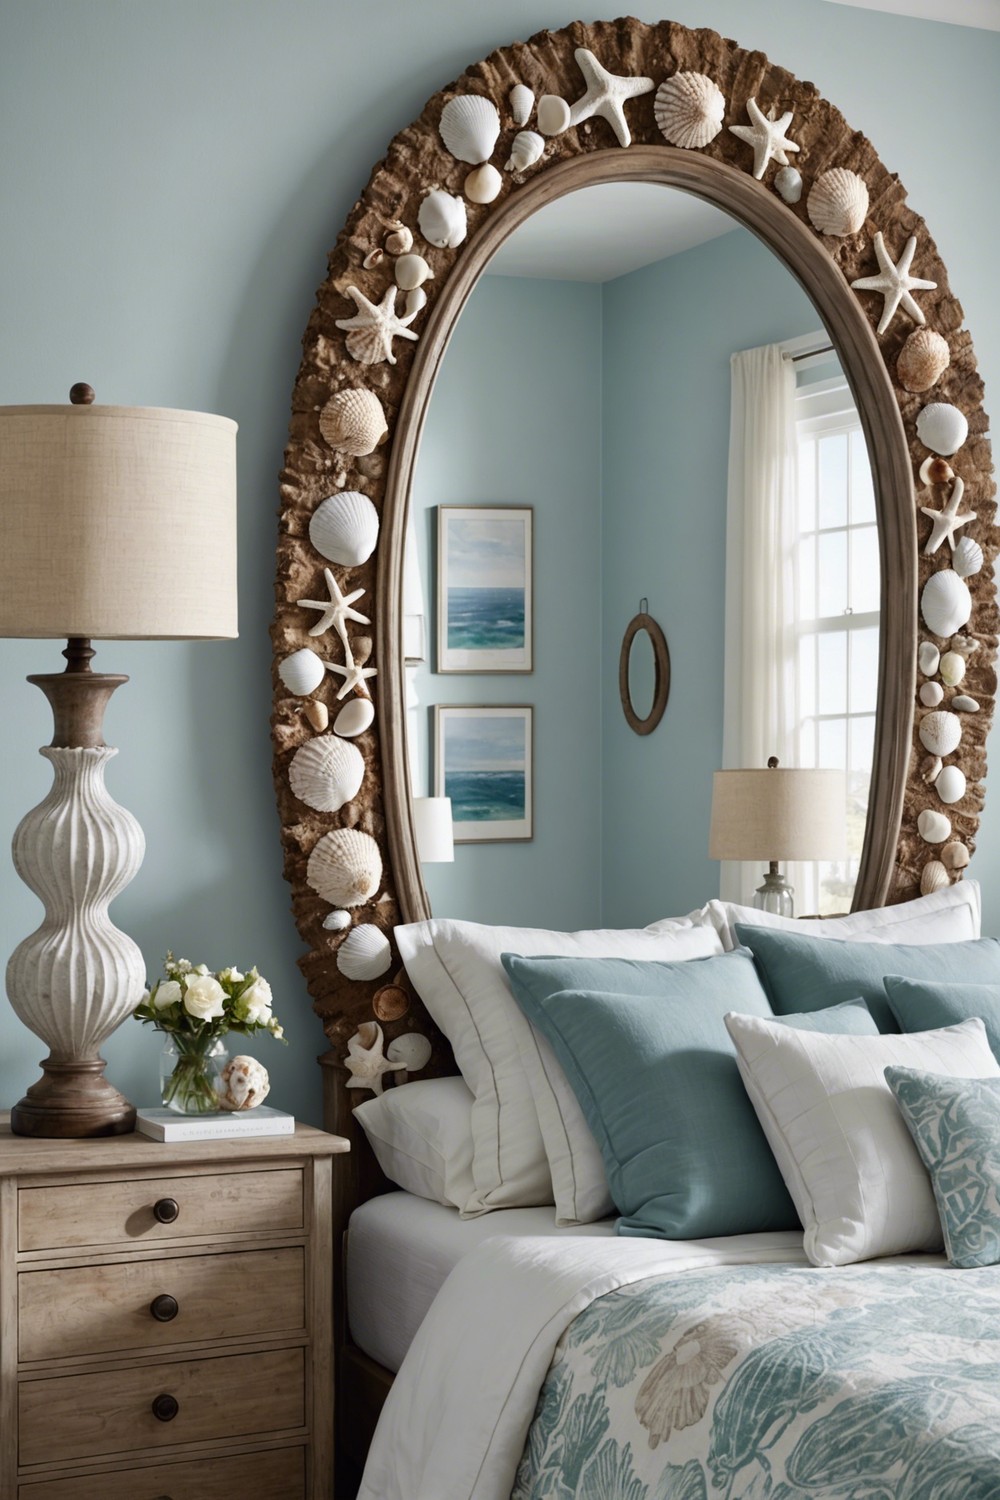 Seashell Accents in the Bedroom